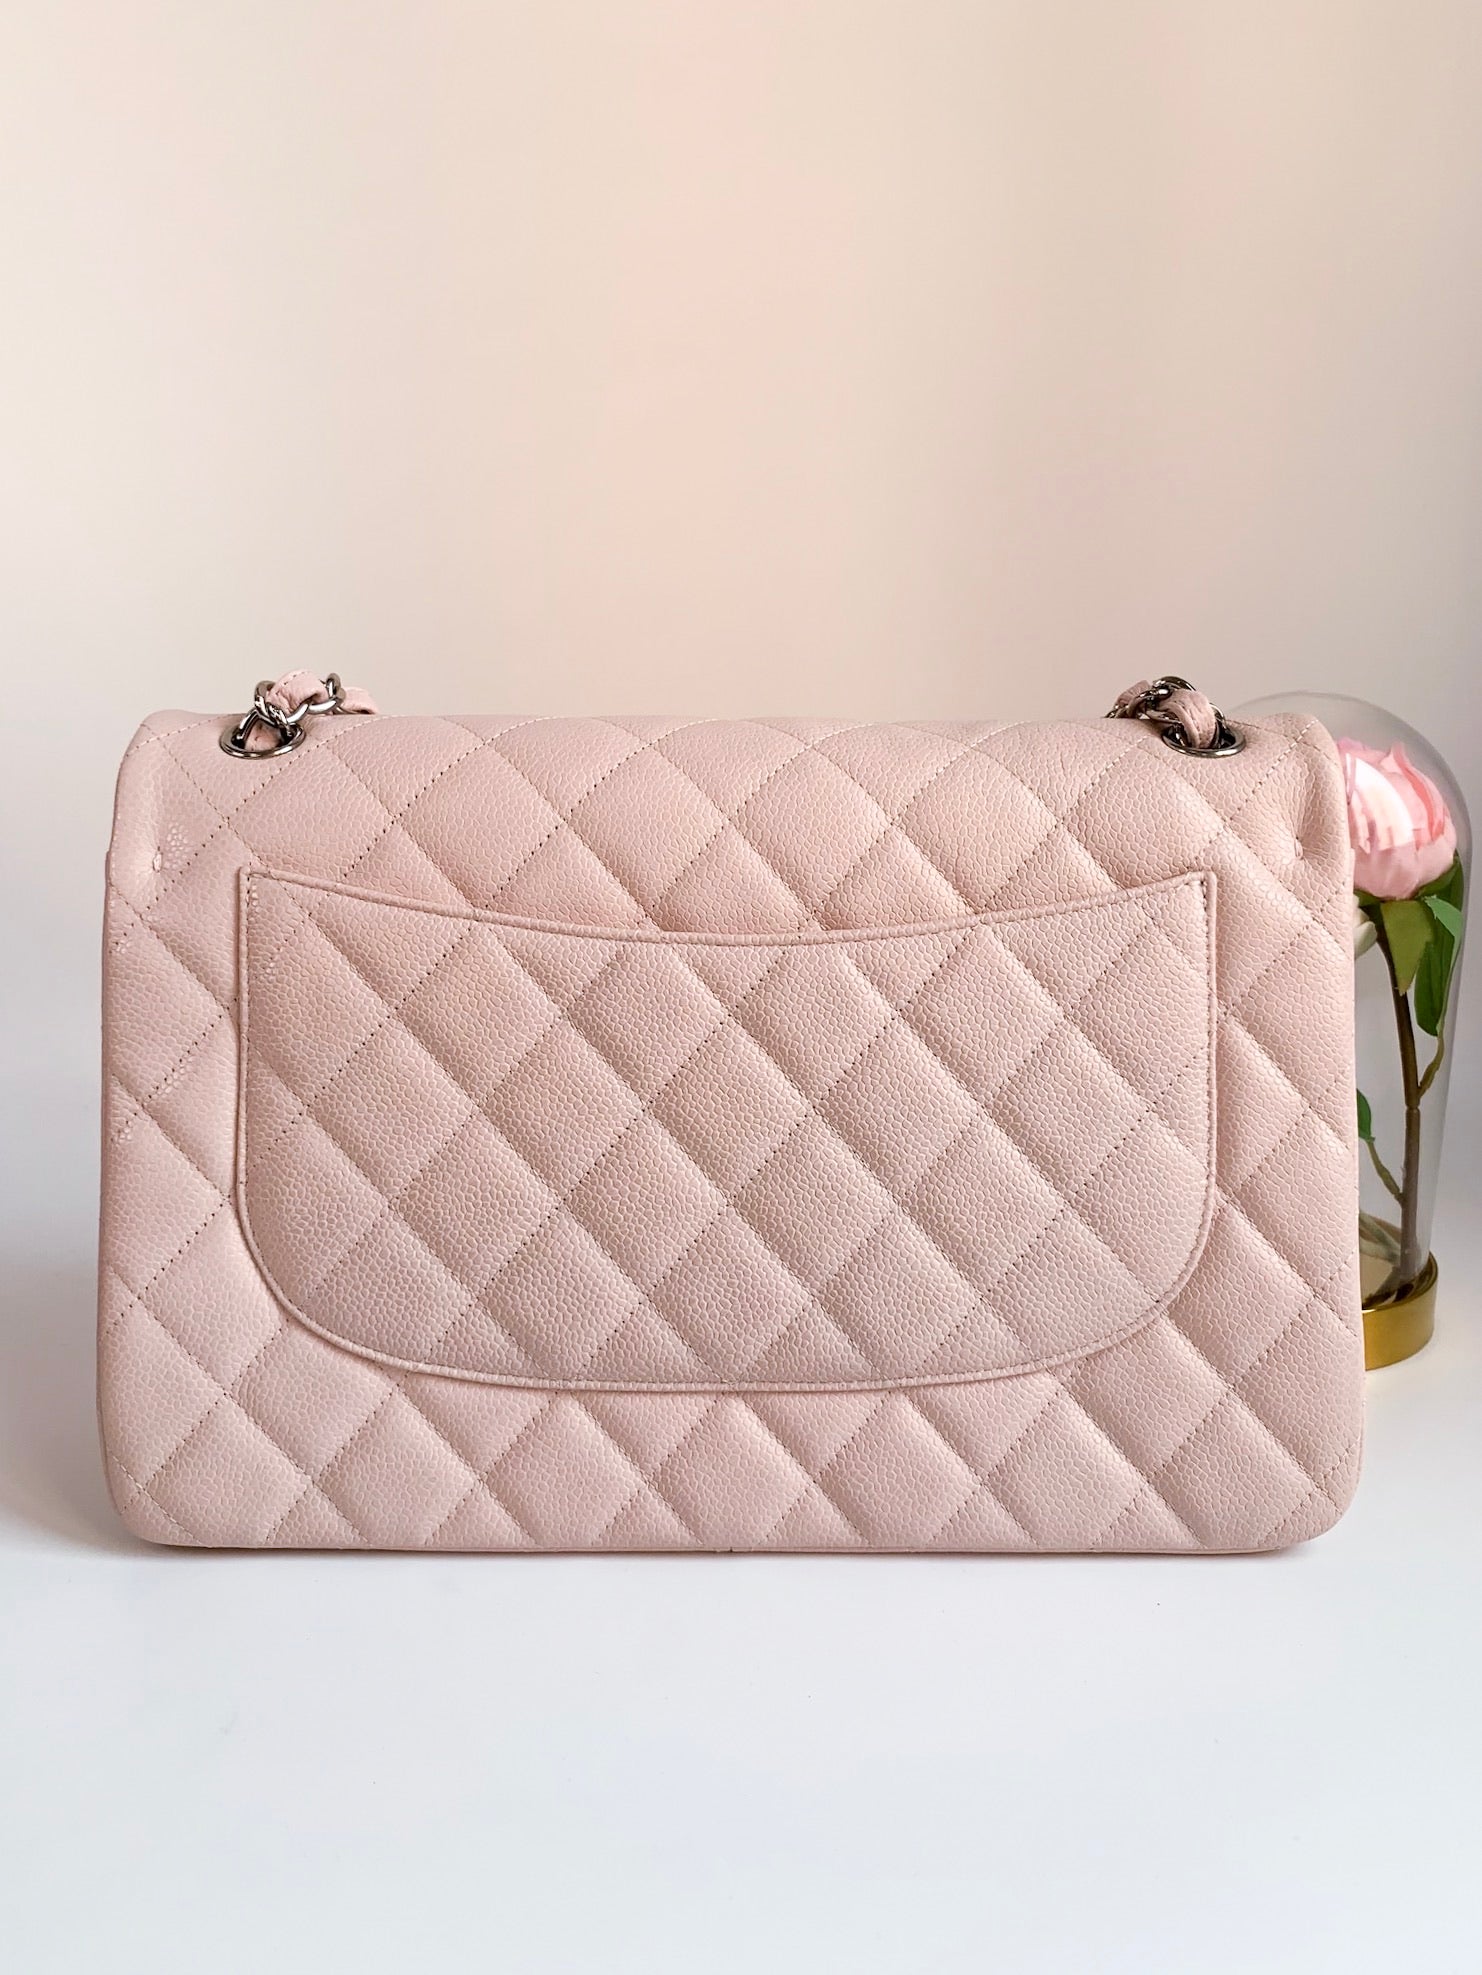 Chanel Classic Quilted Caviar Double Flap Jumbo Bag in Pearlescent Ivory